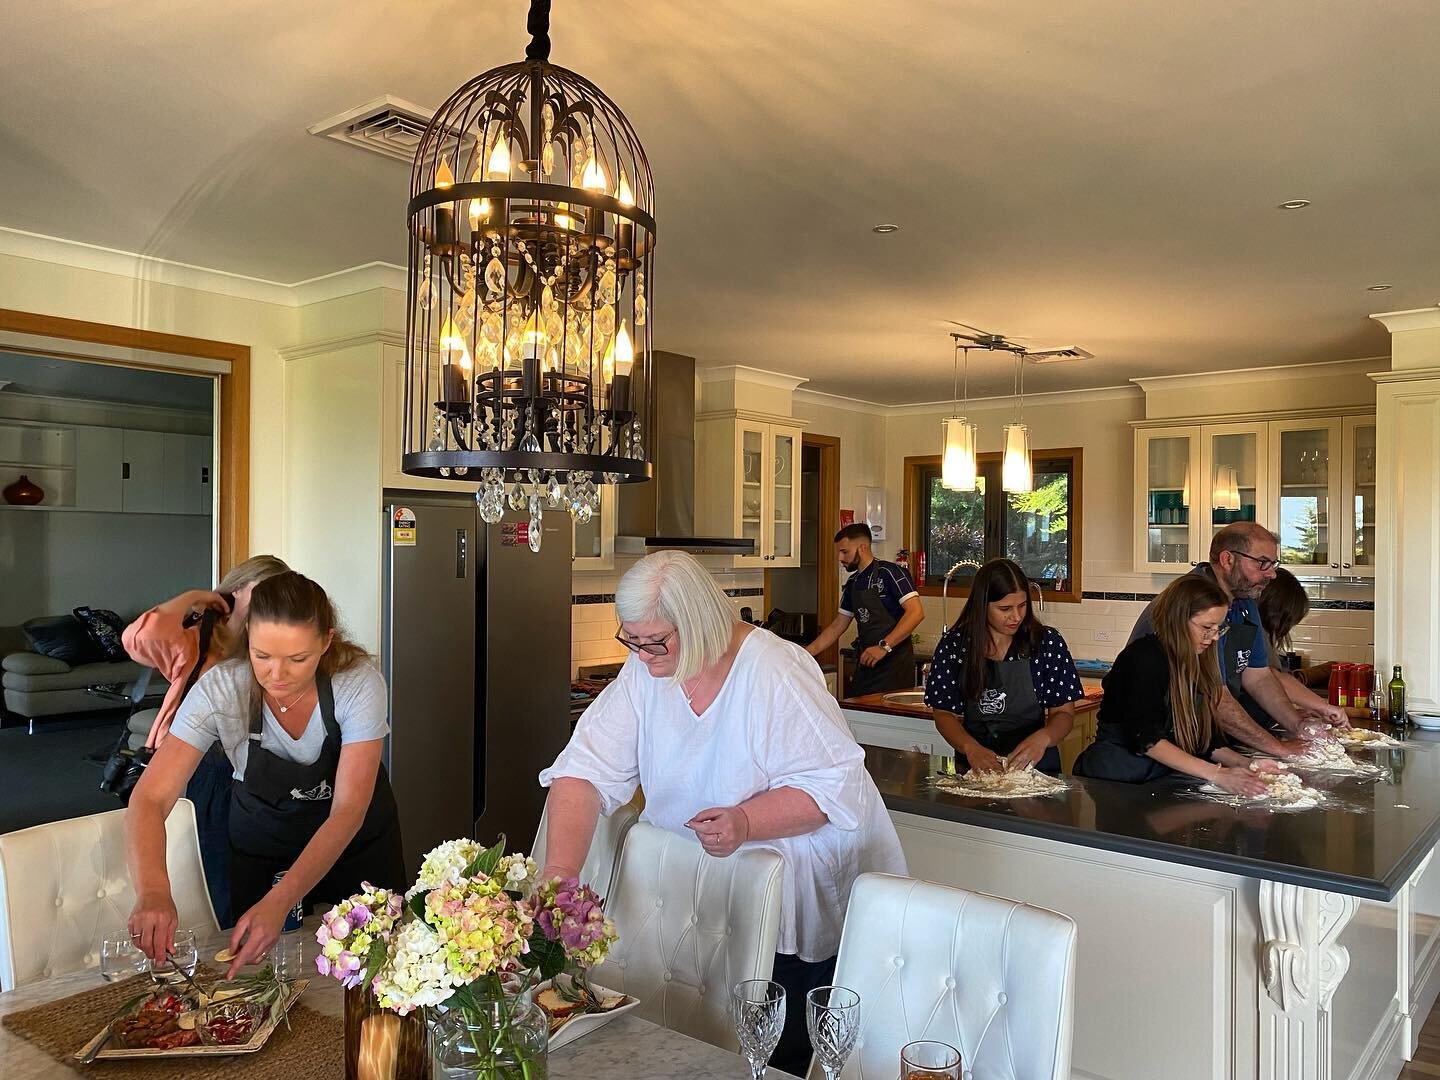 Preparing food together to celebrate that special someone.... #graysonsestate #family #mothersday #celebration #birthday #anniversary #reunion #goodfood #goodwine #funtimes #creatingmemories #dinnerparties